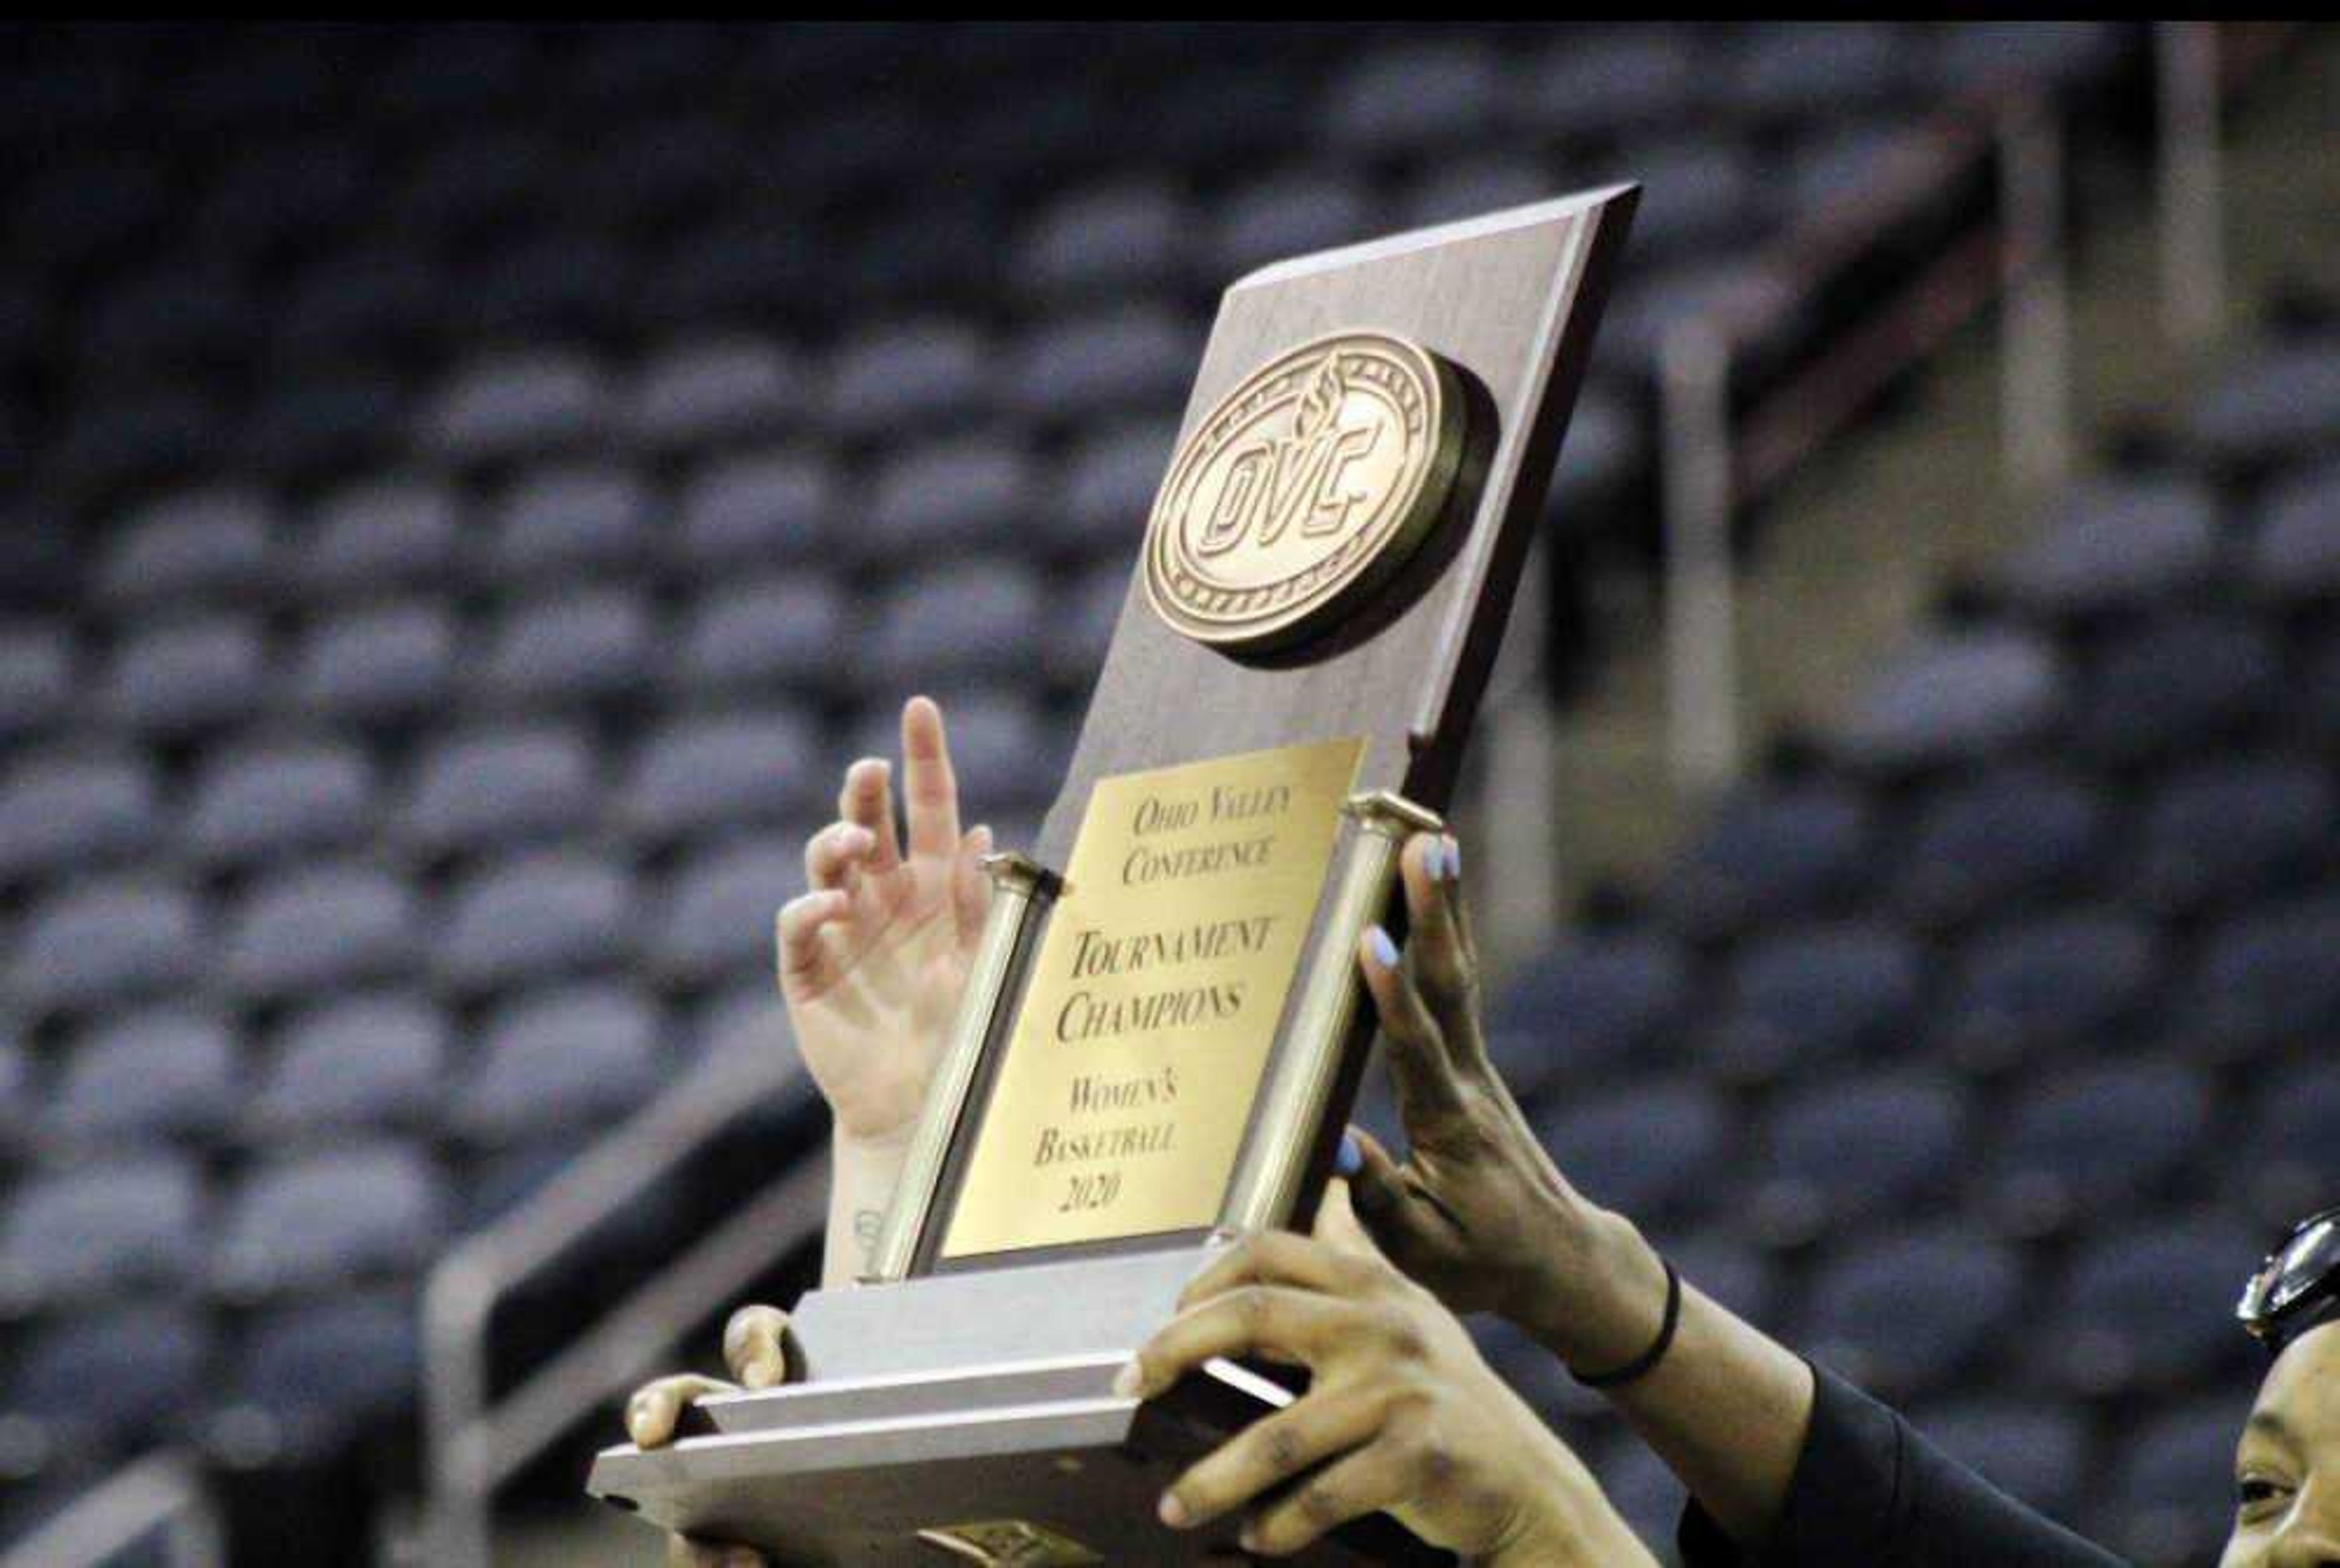 The Southeast women’s basketball team hoisting the OVC Tournament championship trophy on March 7.